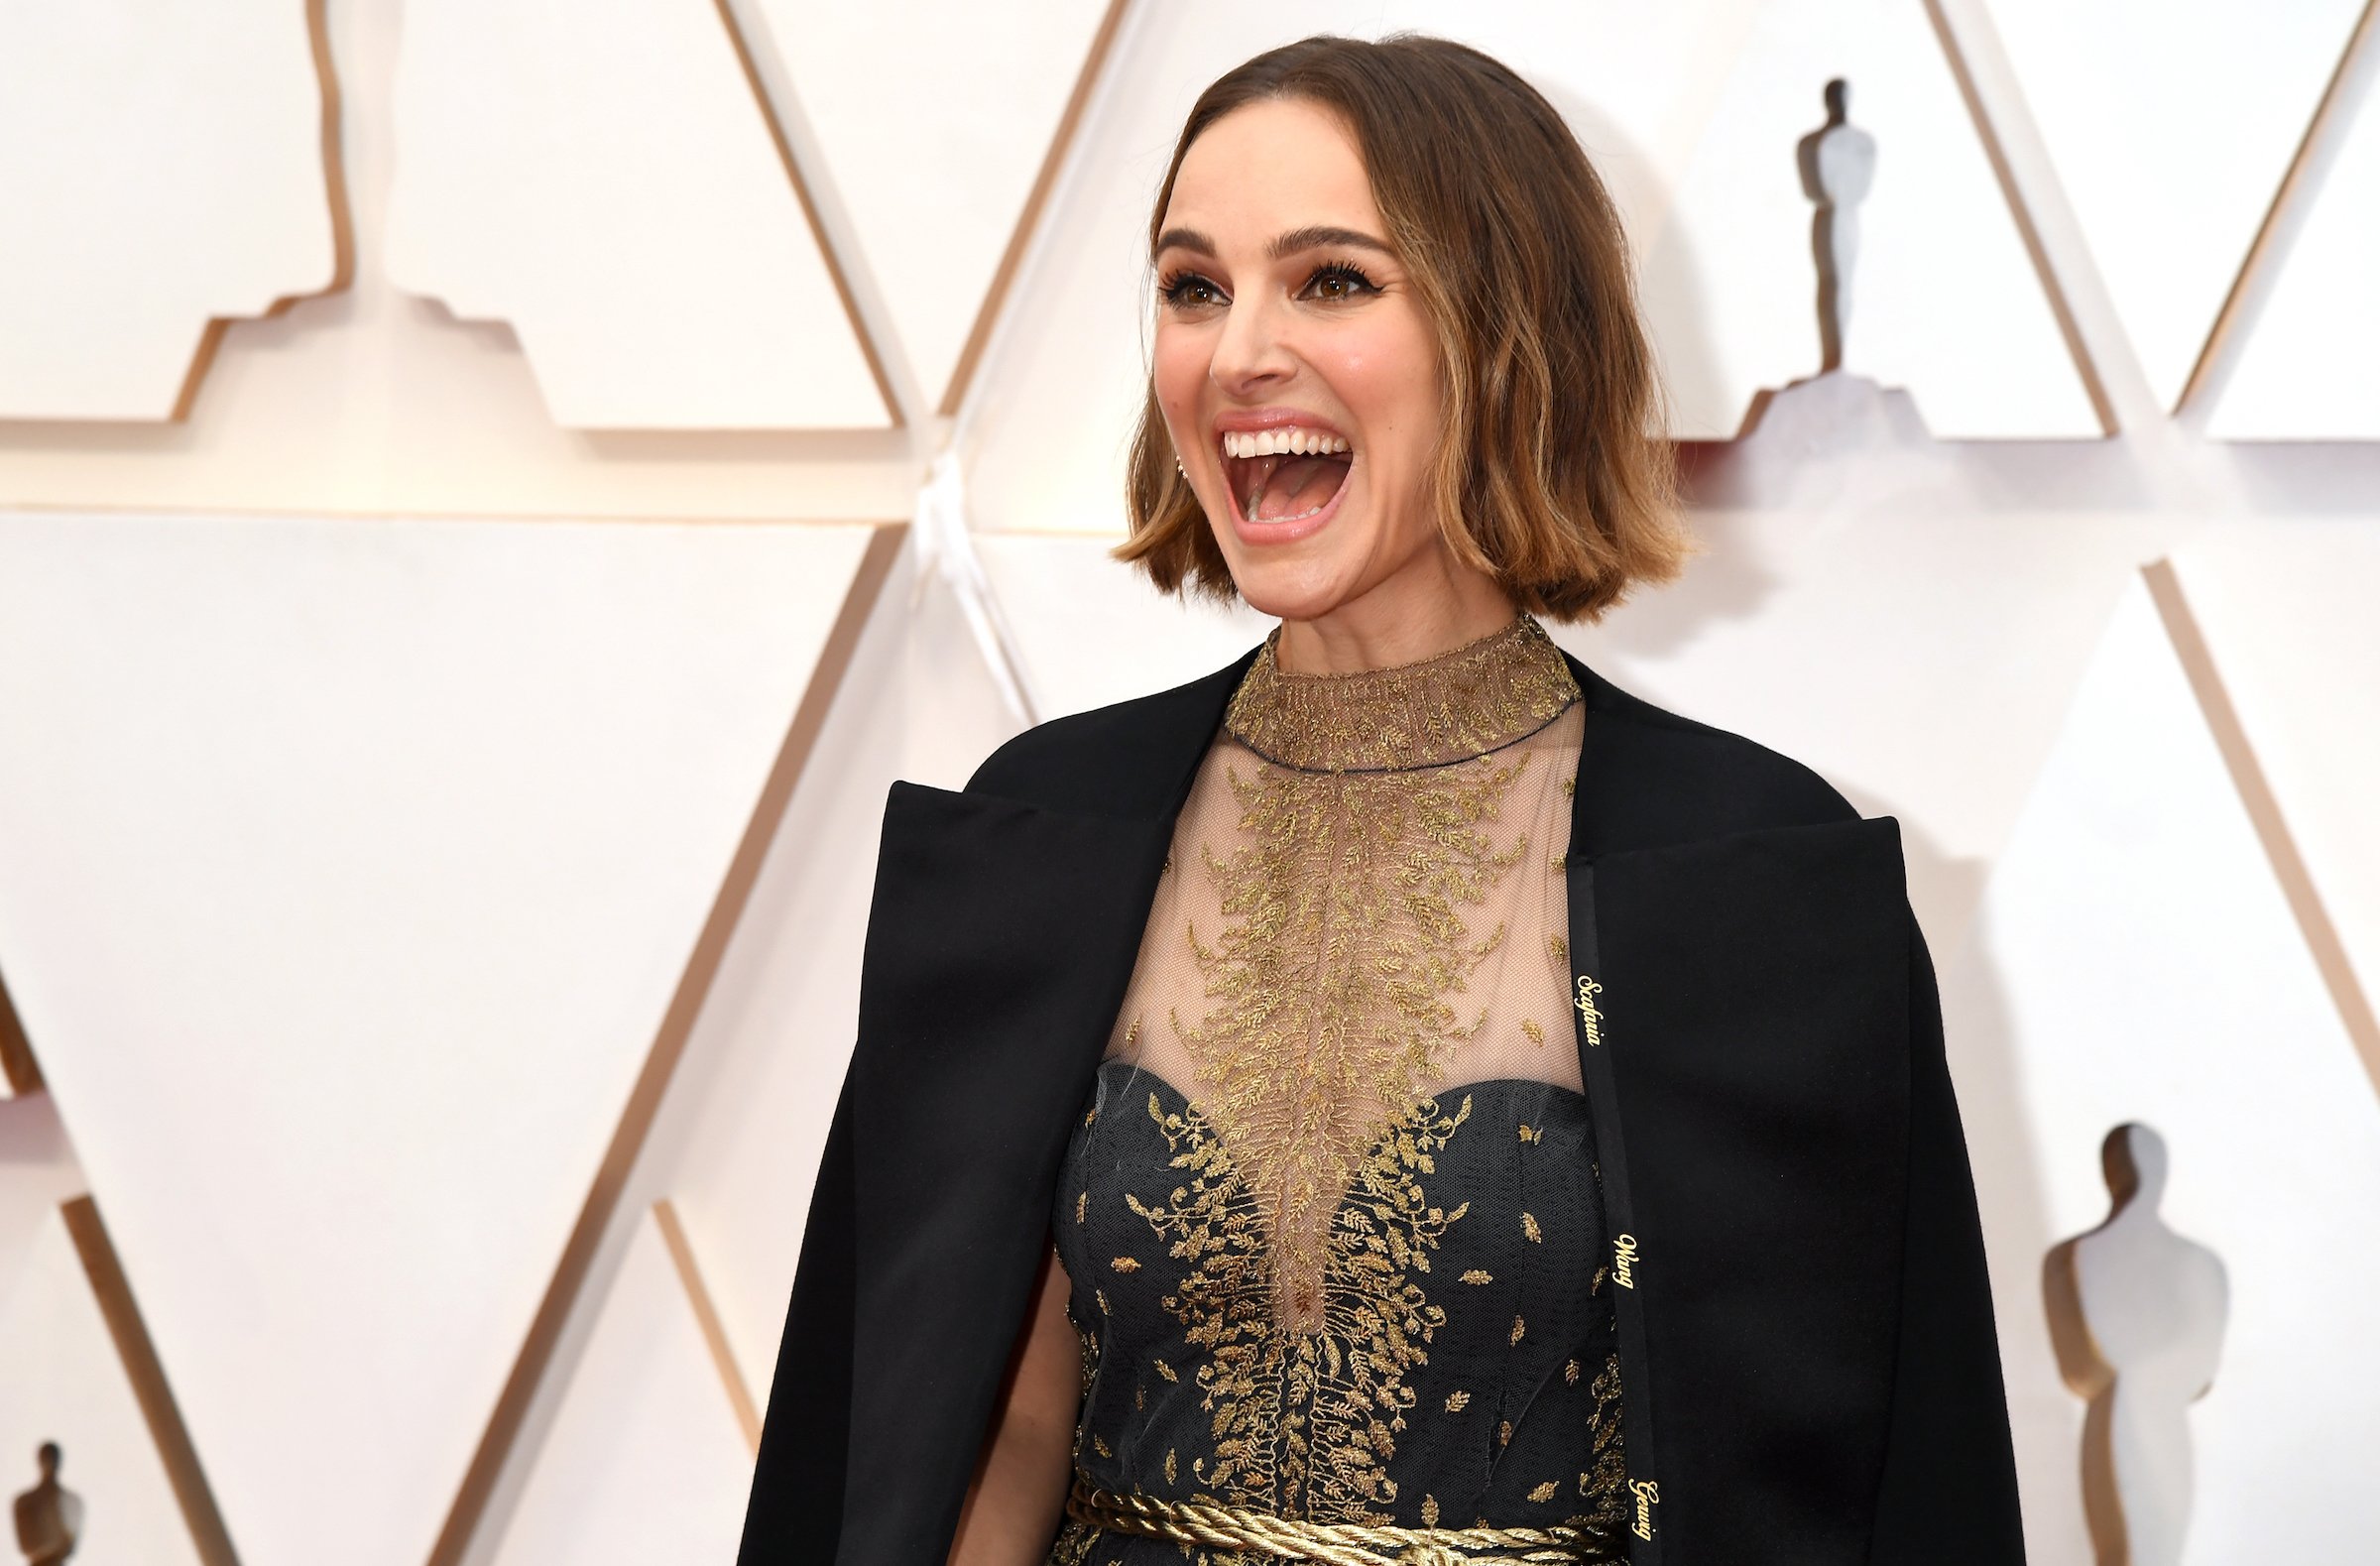 Natalie Portman attends the 92nd Annual Academy Awards